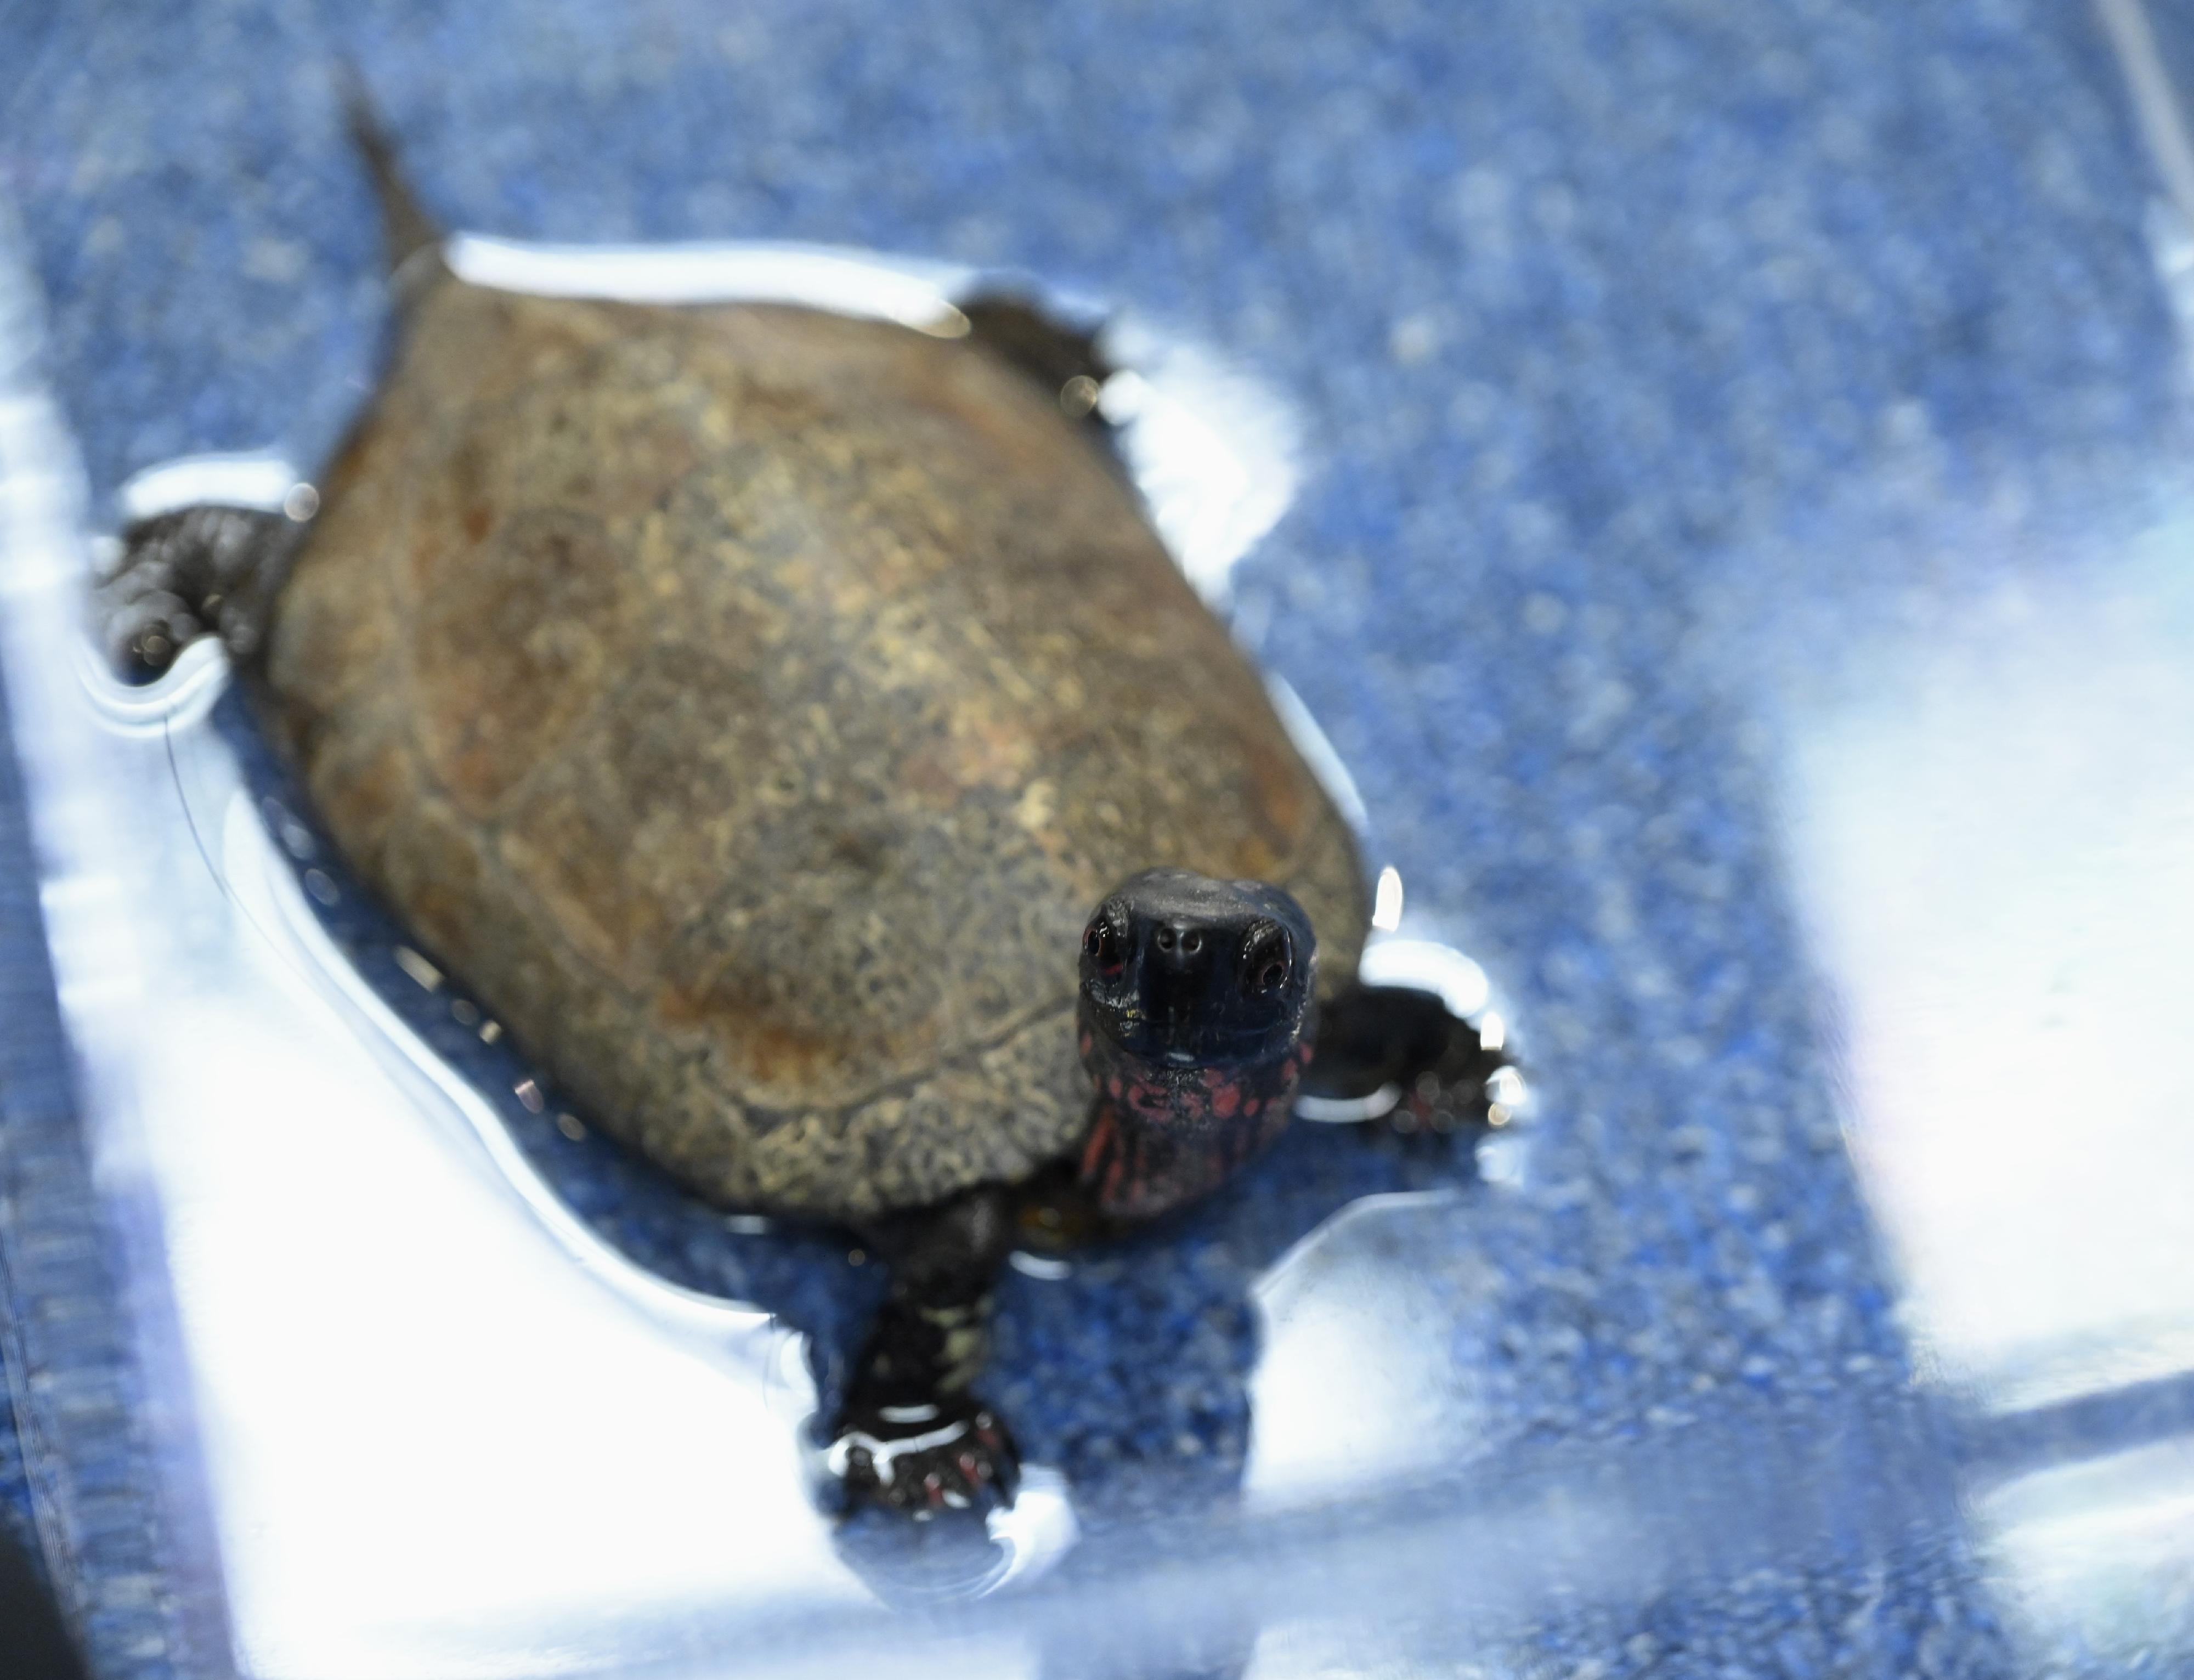 The Agriculture, Fisheries and Conservation Department conducted a joint operation with the Hong Kong Police Force on May 17 on a case of suspected illegal possession of endangered species. Thirty-one specimens of turtles suspected of being illegally possessed were seized on a premises. Photo shows a Beale's eyed turtle (Sacalia bealei), which is listed on Appendix II to the Convention on International Trade in Endangered Species of Wild Fauna and Flora, seized by the officers.